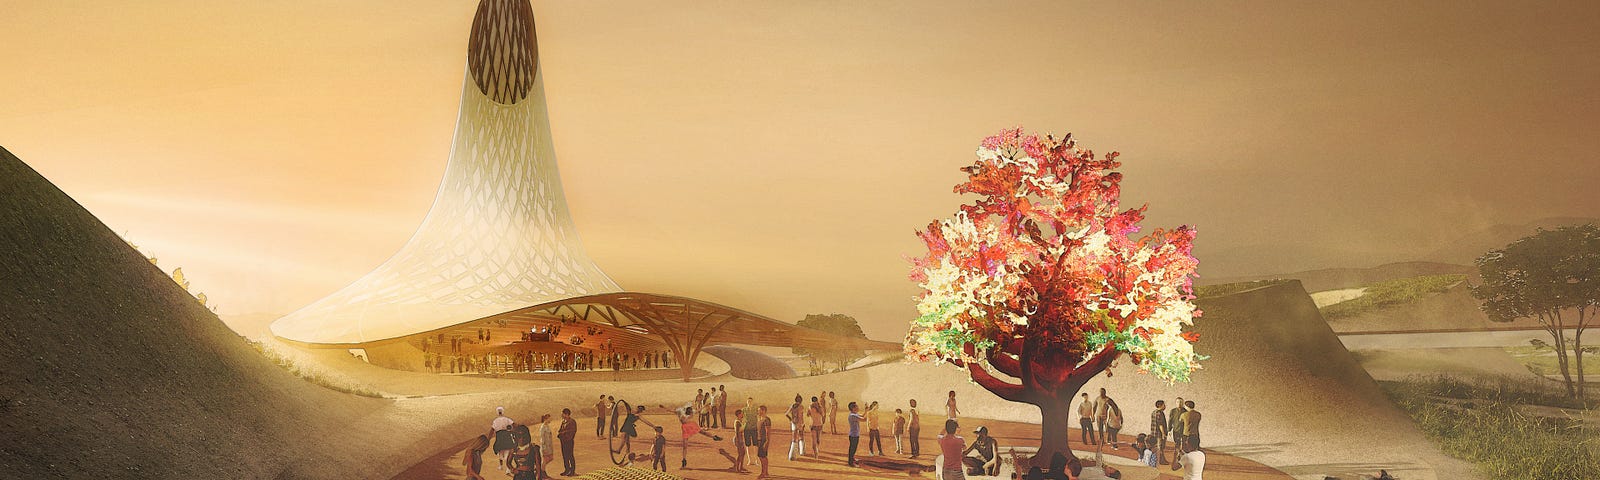 Project SEED, a regenerative city being built at Fly Ranch, winner of the LAGI x Burning Man competition.